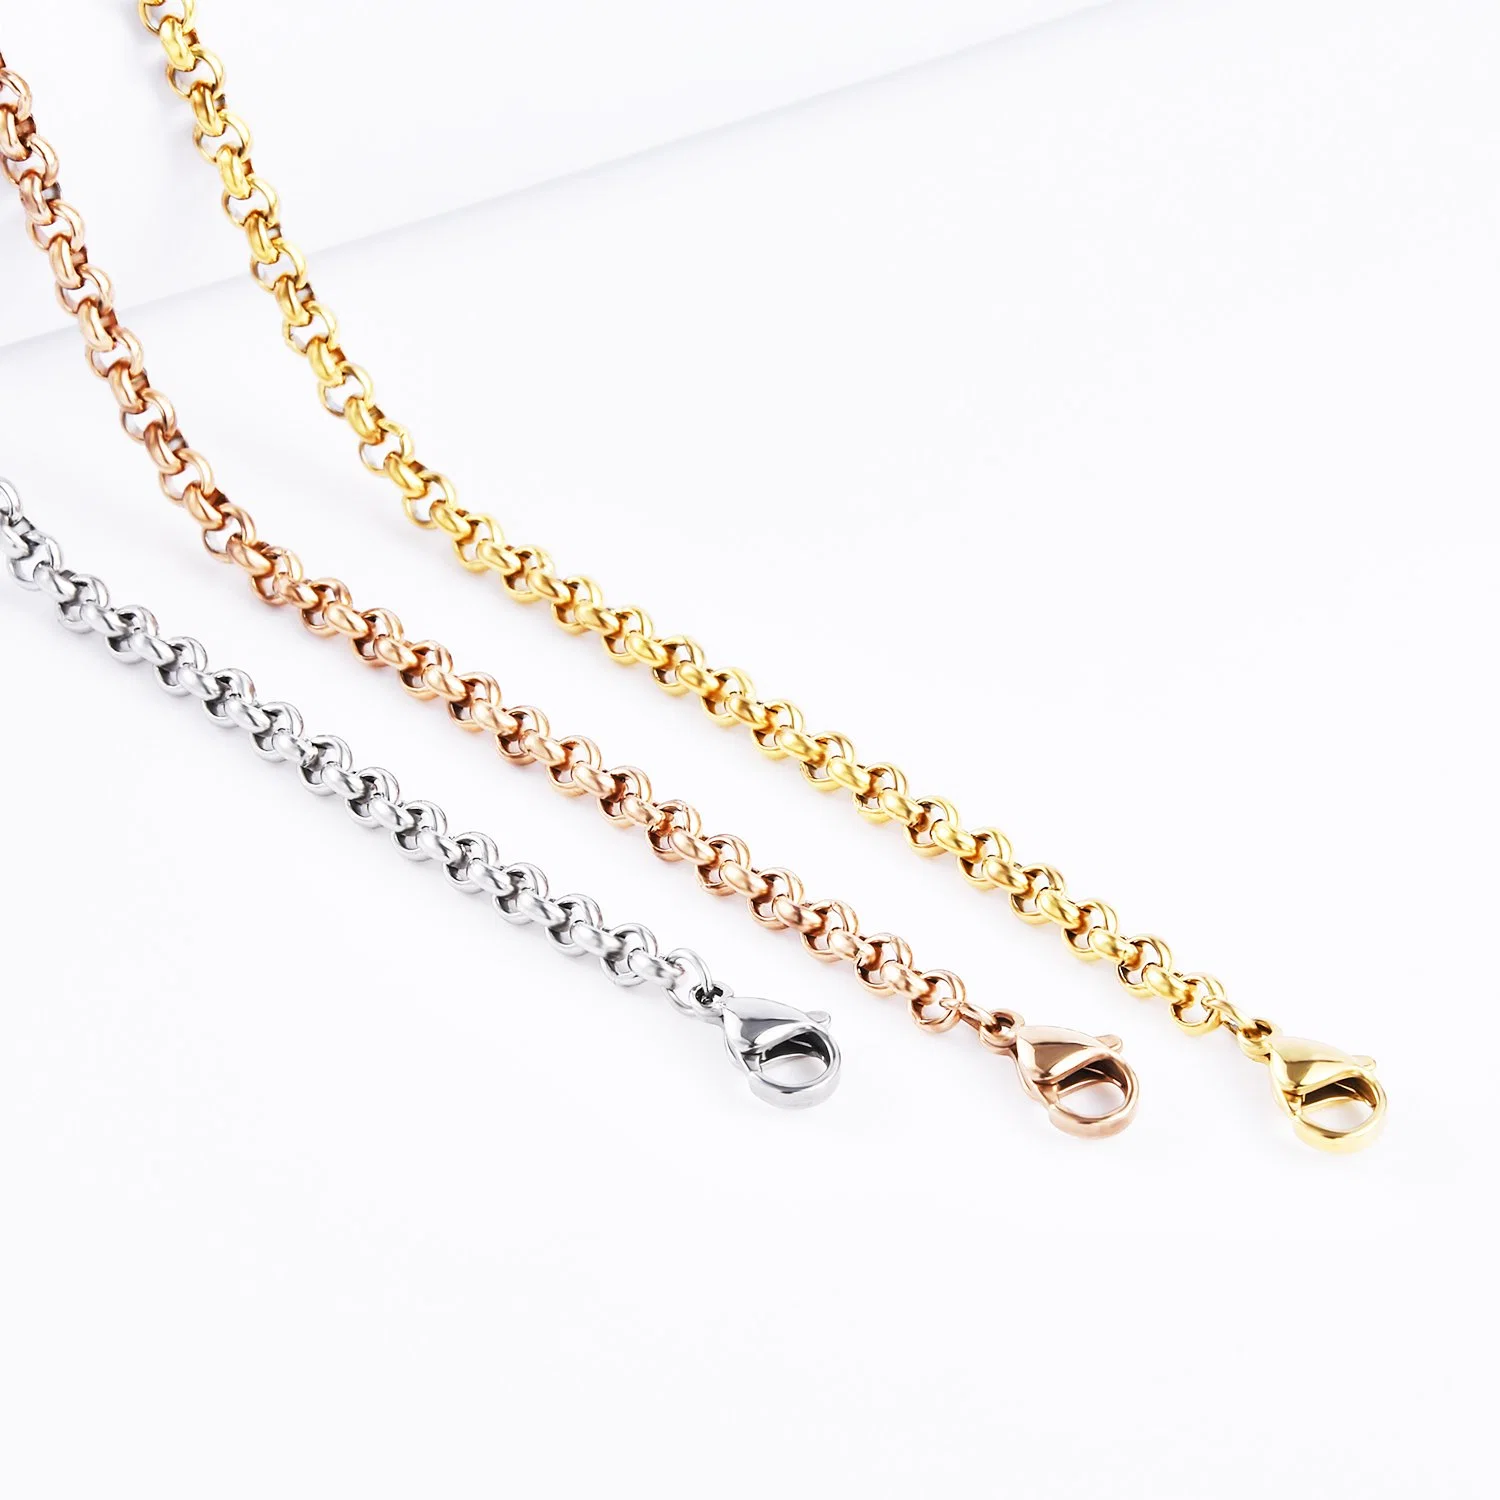 Wholesale 18K Stainless Steel Gold Plated Belcher Rolo Chain Fashion Jewelry for Necklace Bracelet Gift Handcraft Design